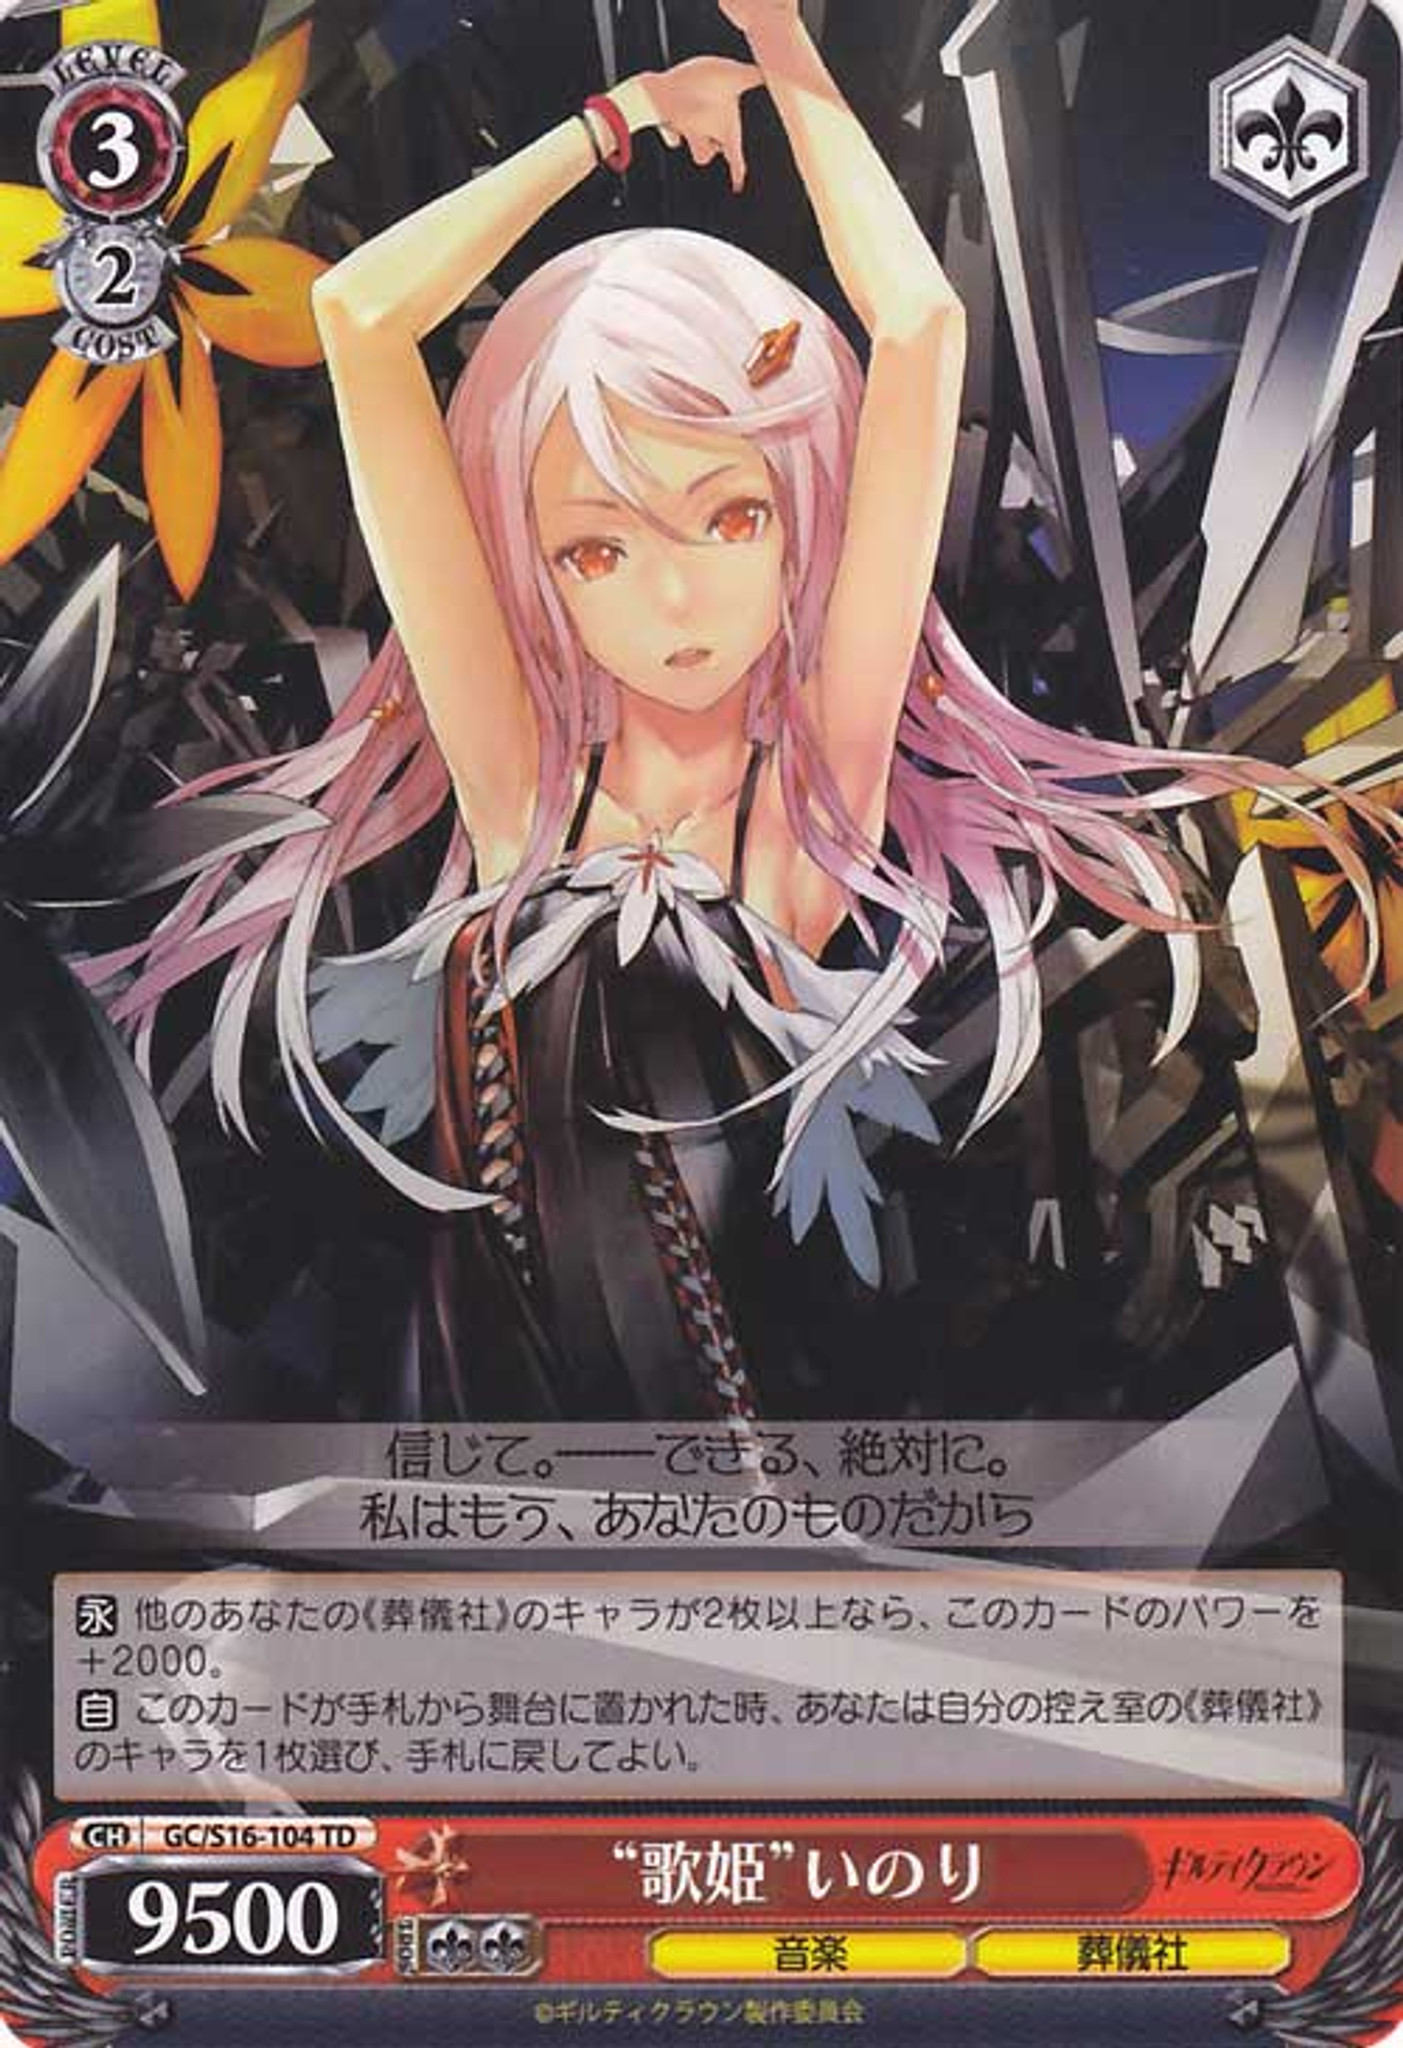 Collectible Card Games Ws Weib Weiss Schwarz Japanese Guilty Crown Gc S16 124pr Toys Hobbies